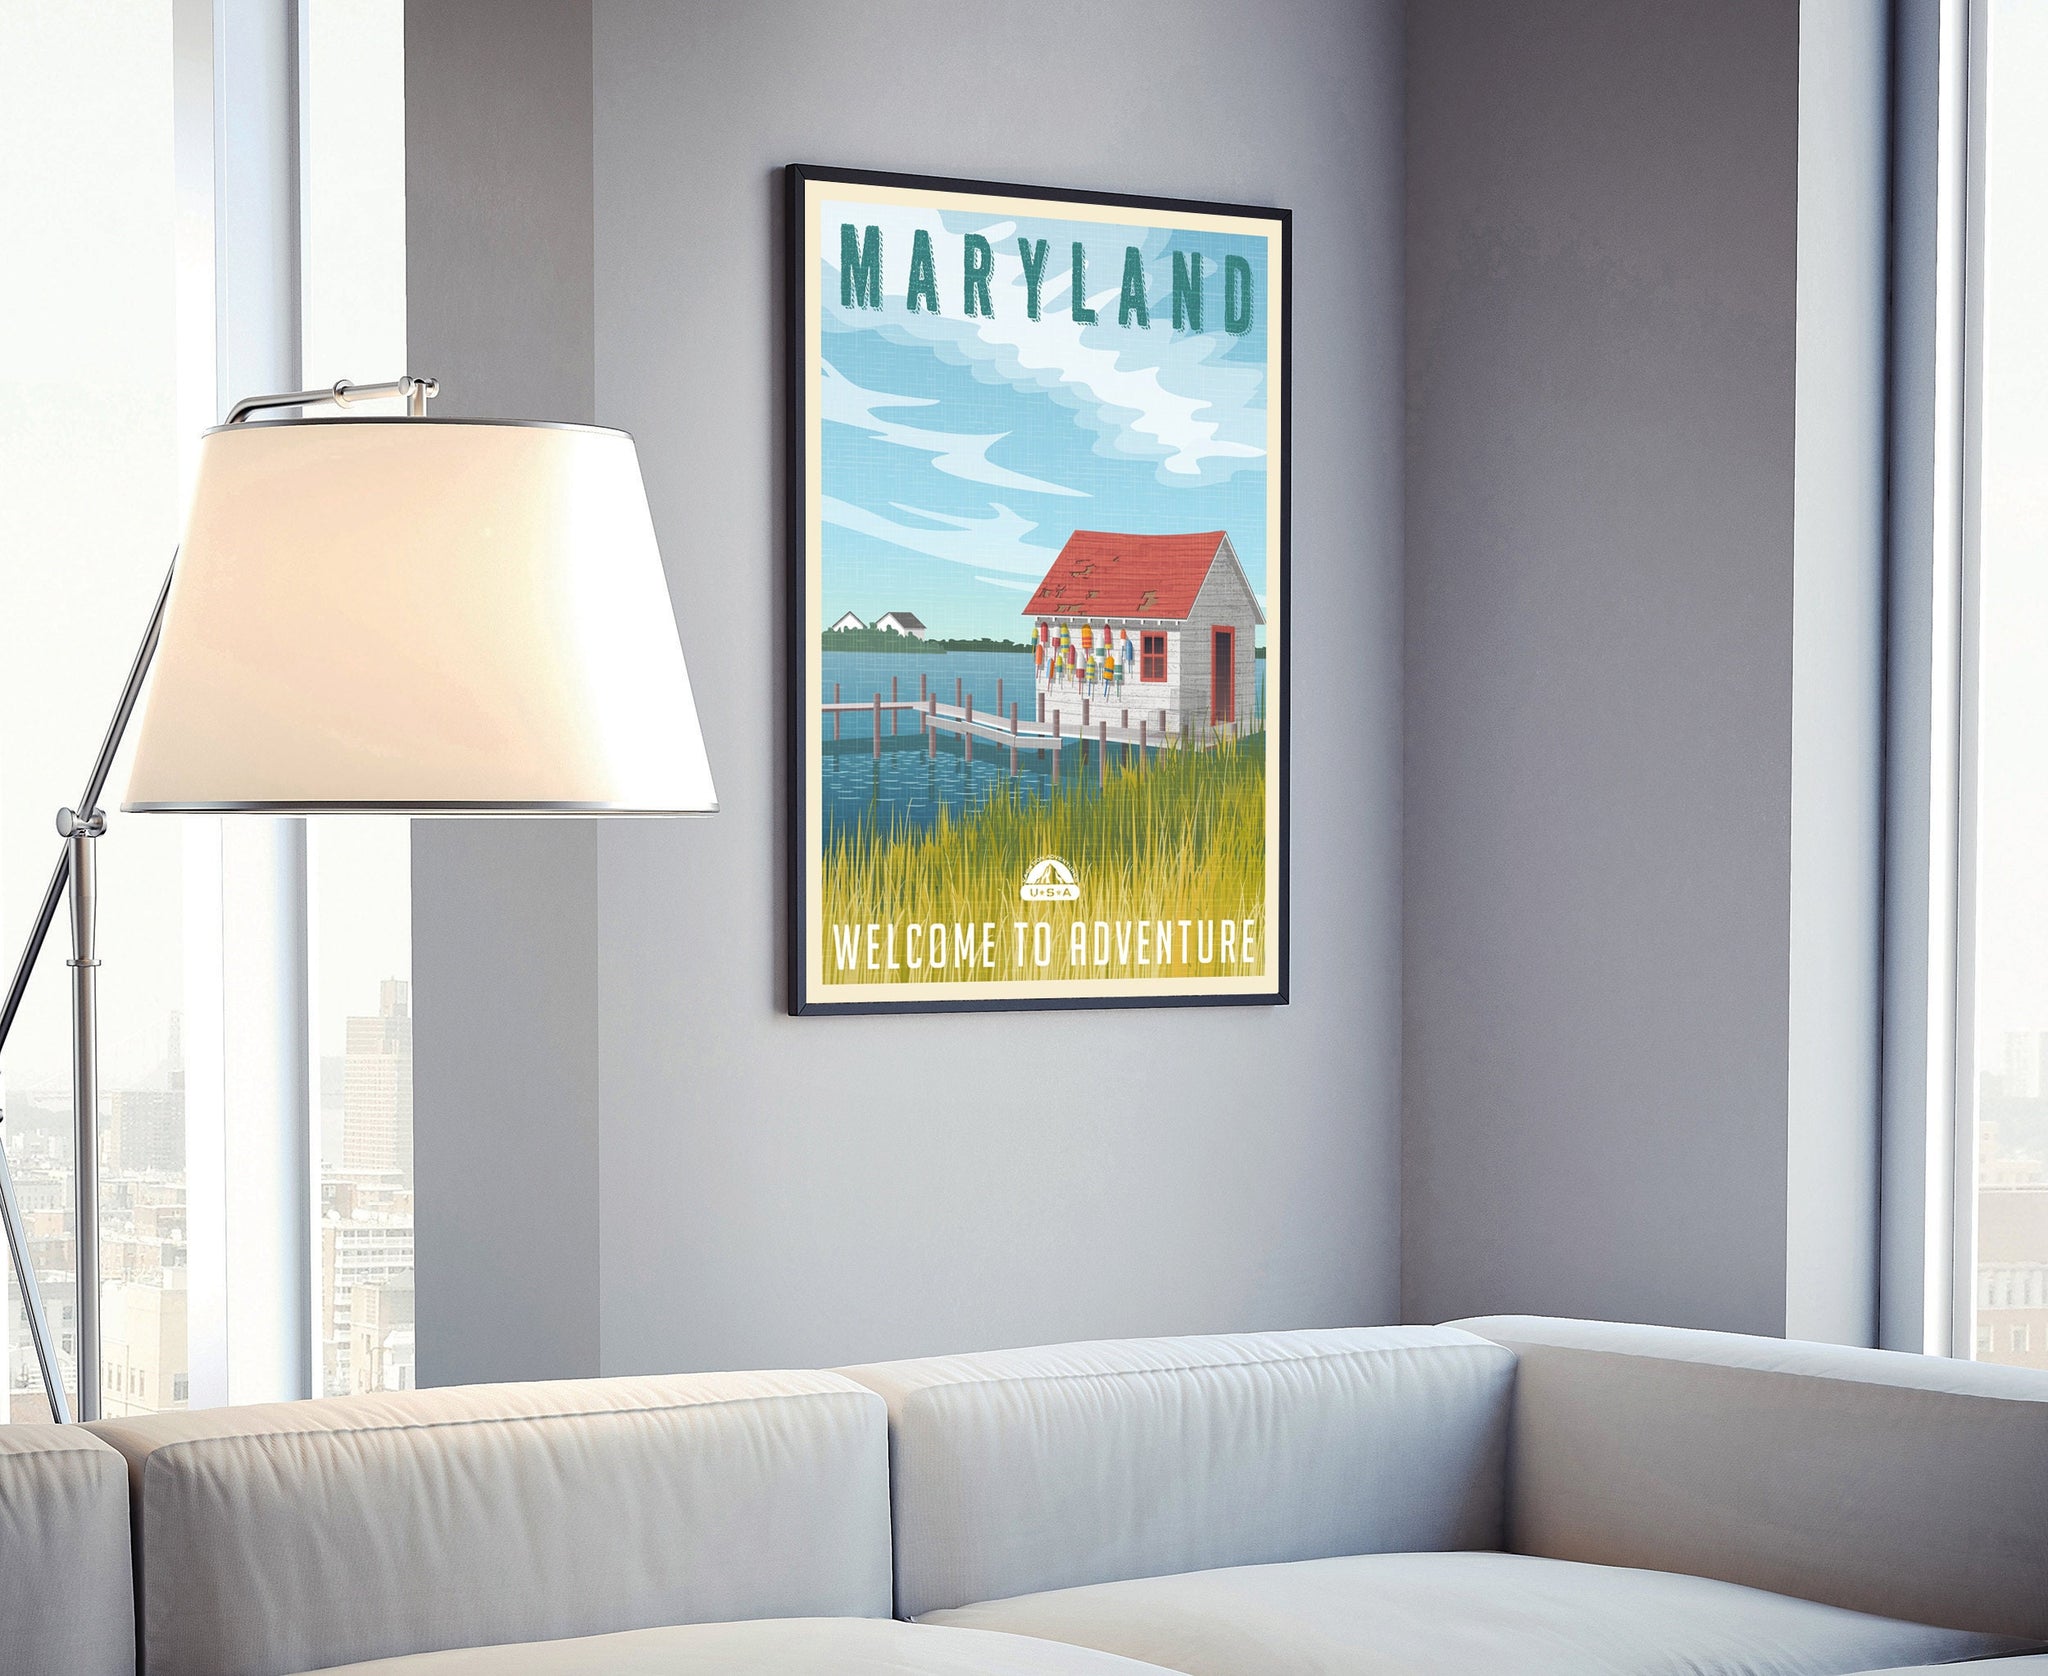 Maryland Vintage Rustic Poster Print, Retro Style Travel Poster